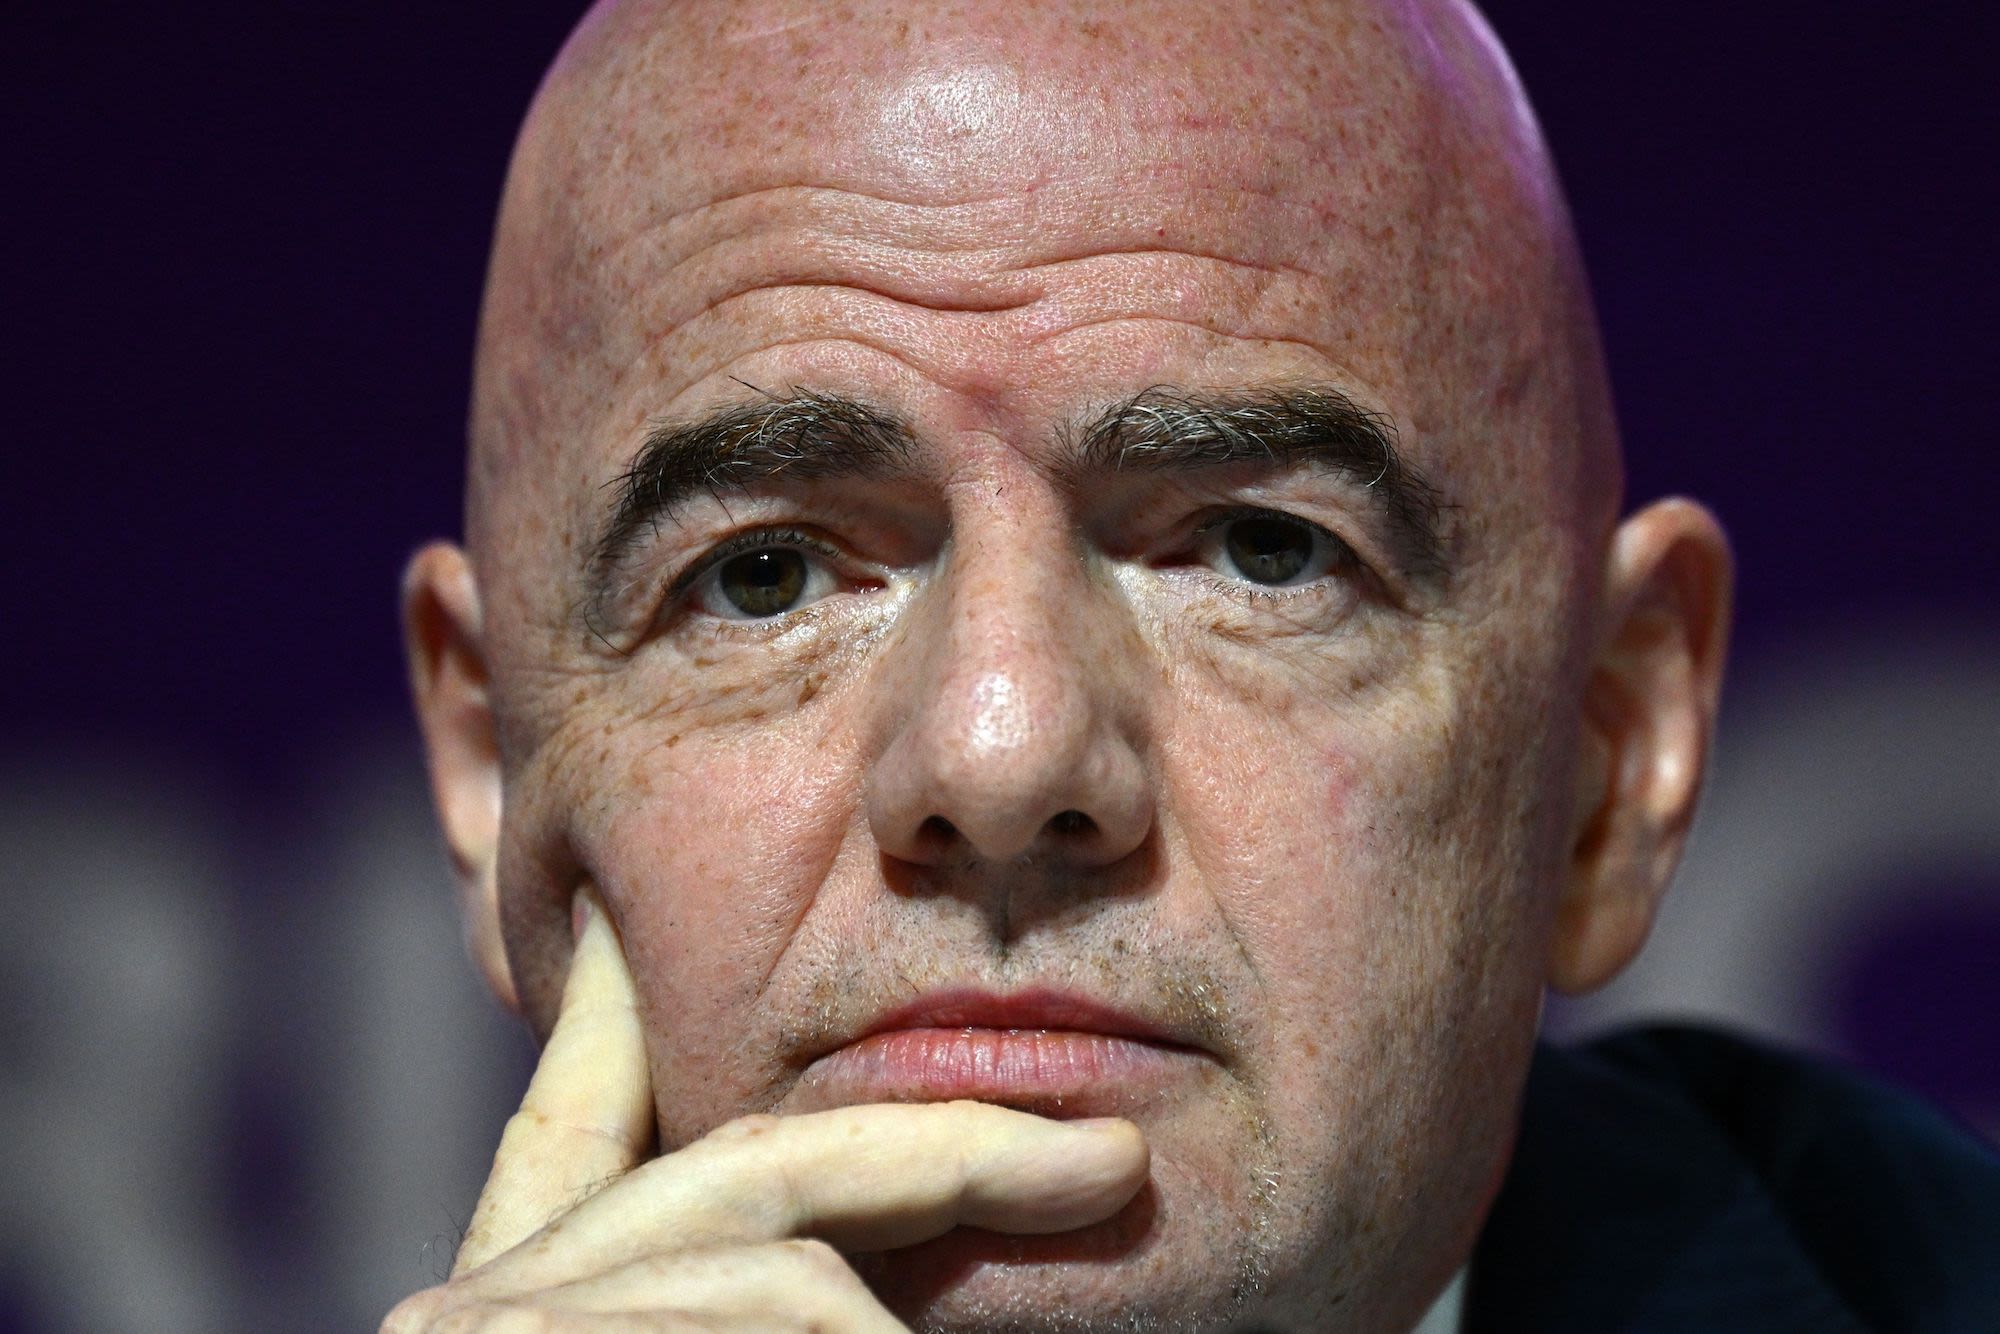 FIFA president scolds critics of World Cup, Qatar in hour-long diatribe